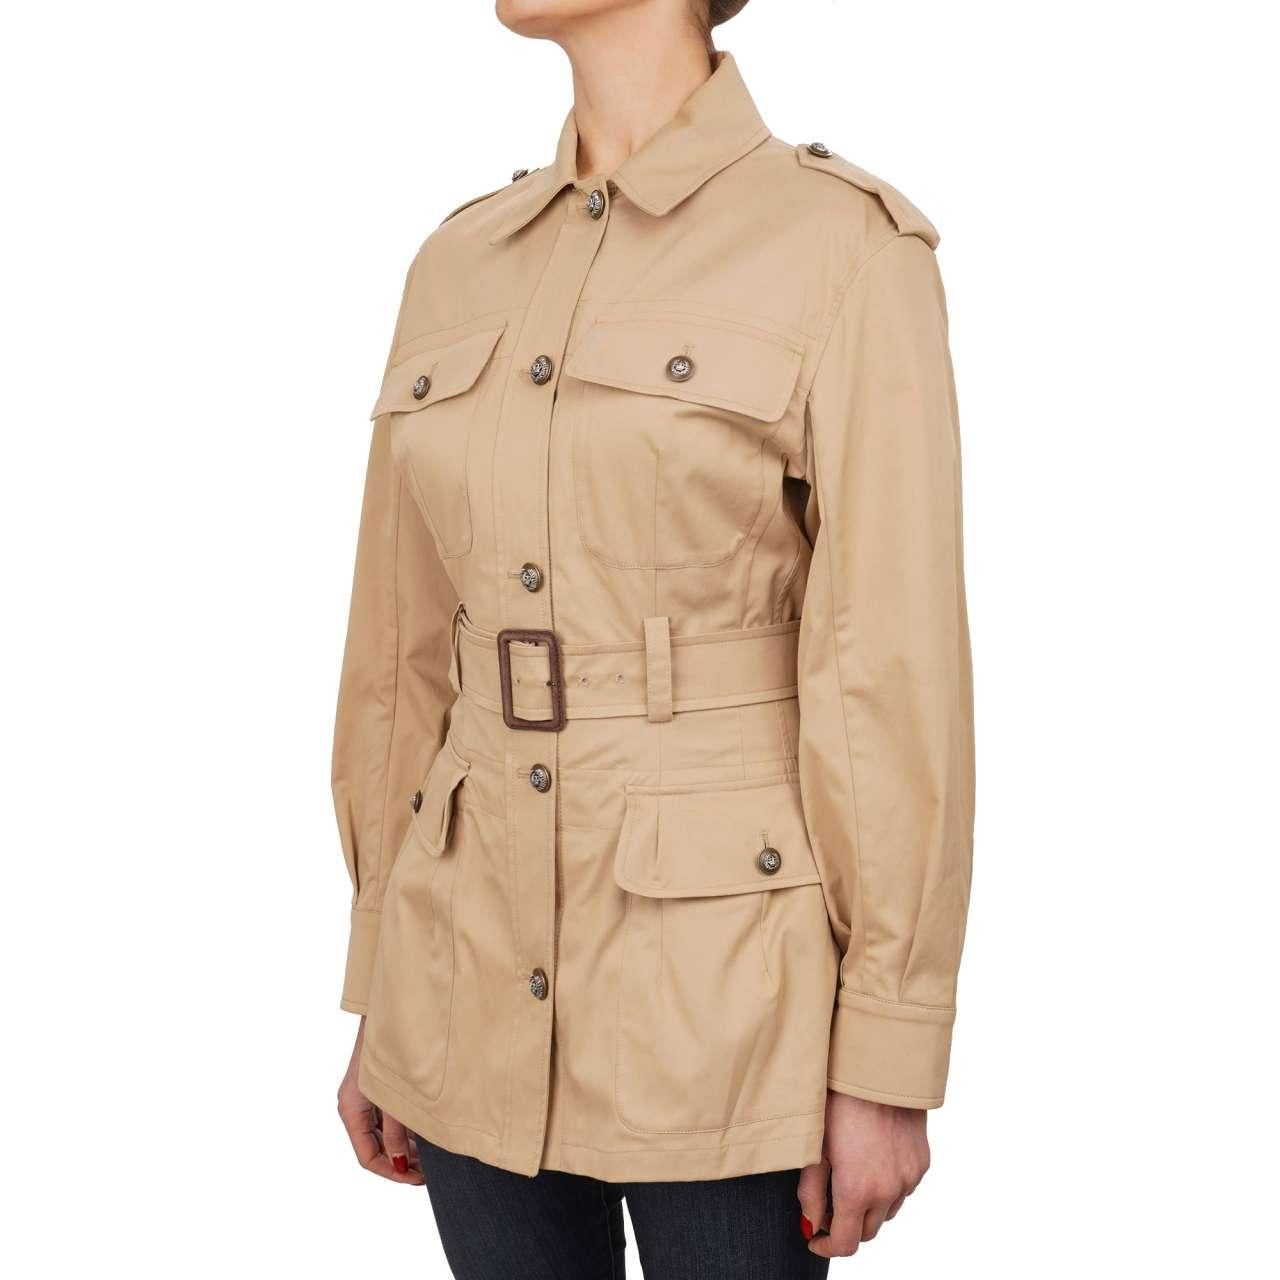 - Trench Coat Safari Jacket with metal crown buttons, belt and pockets by DOLCE & GABBANA - Former RRP: EUR 1.550 - New with tag - Slim Fit - MADE IN ITALY - Model: F28VAT-FUFJ9-S9403 - Material: 97% Cotton, 3% Elastan - Color: Beige - Large picture